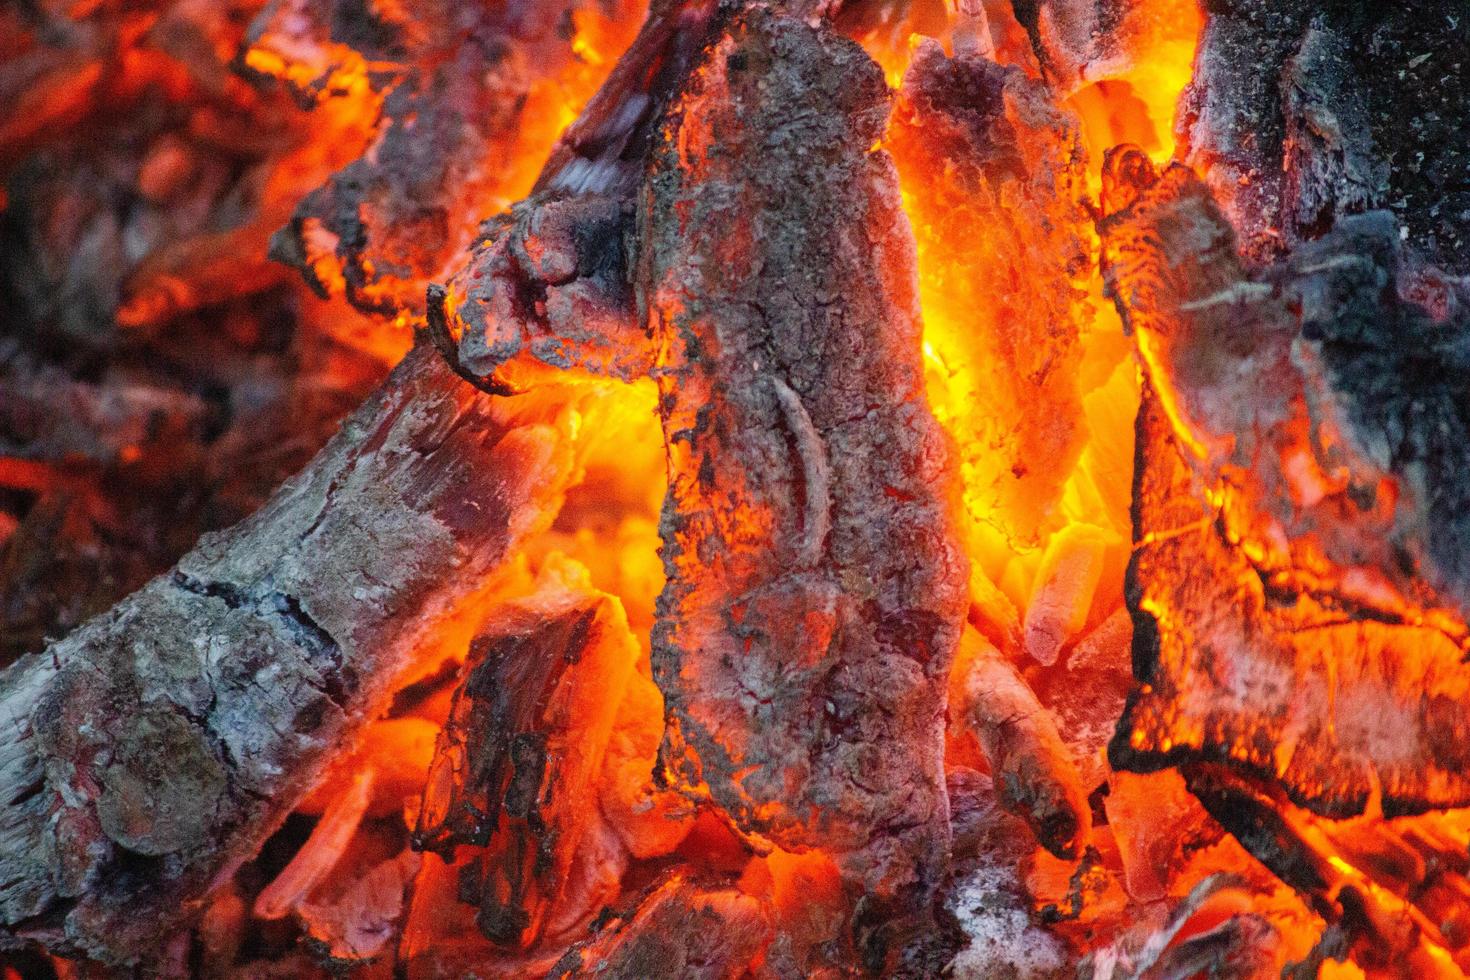 Hot, glowing coals on fire photo